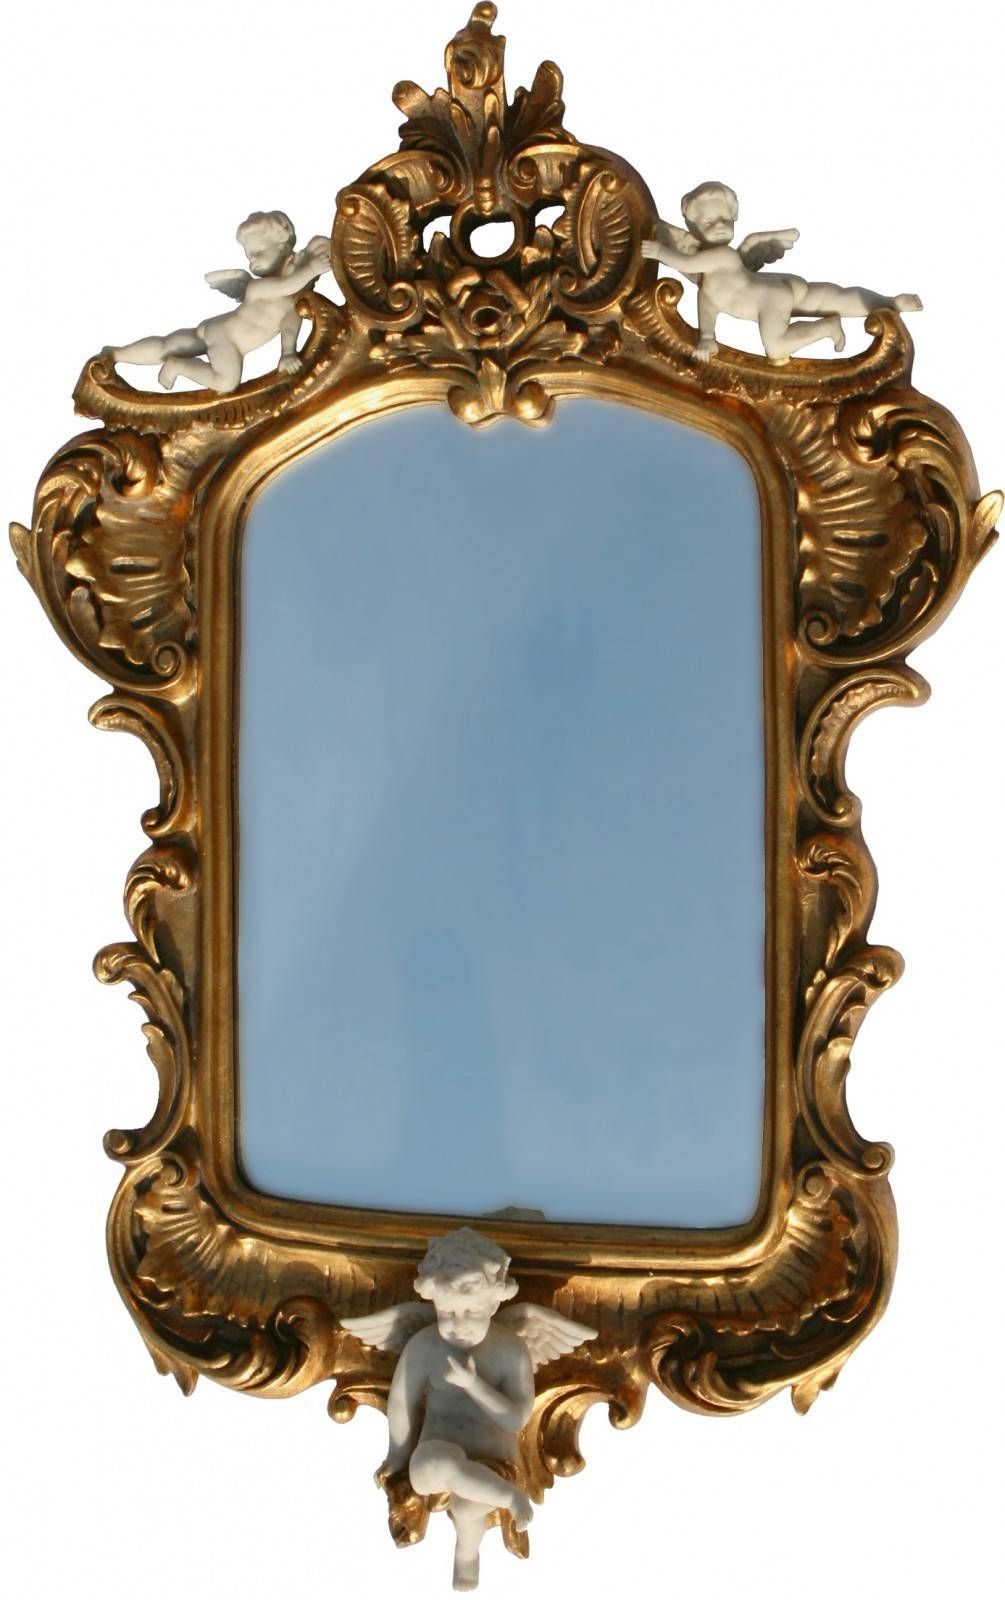 Angel Motif Baroque Mirror In Gold Wooden Frame With Three White Intended For Gold Baroque Mirrors (Photo 4 of 15)